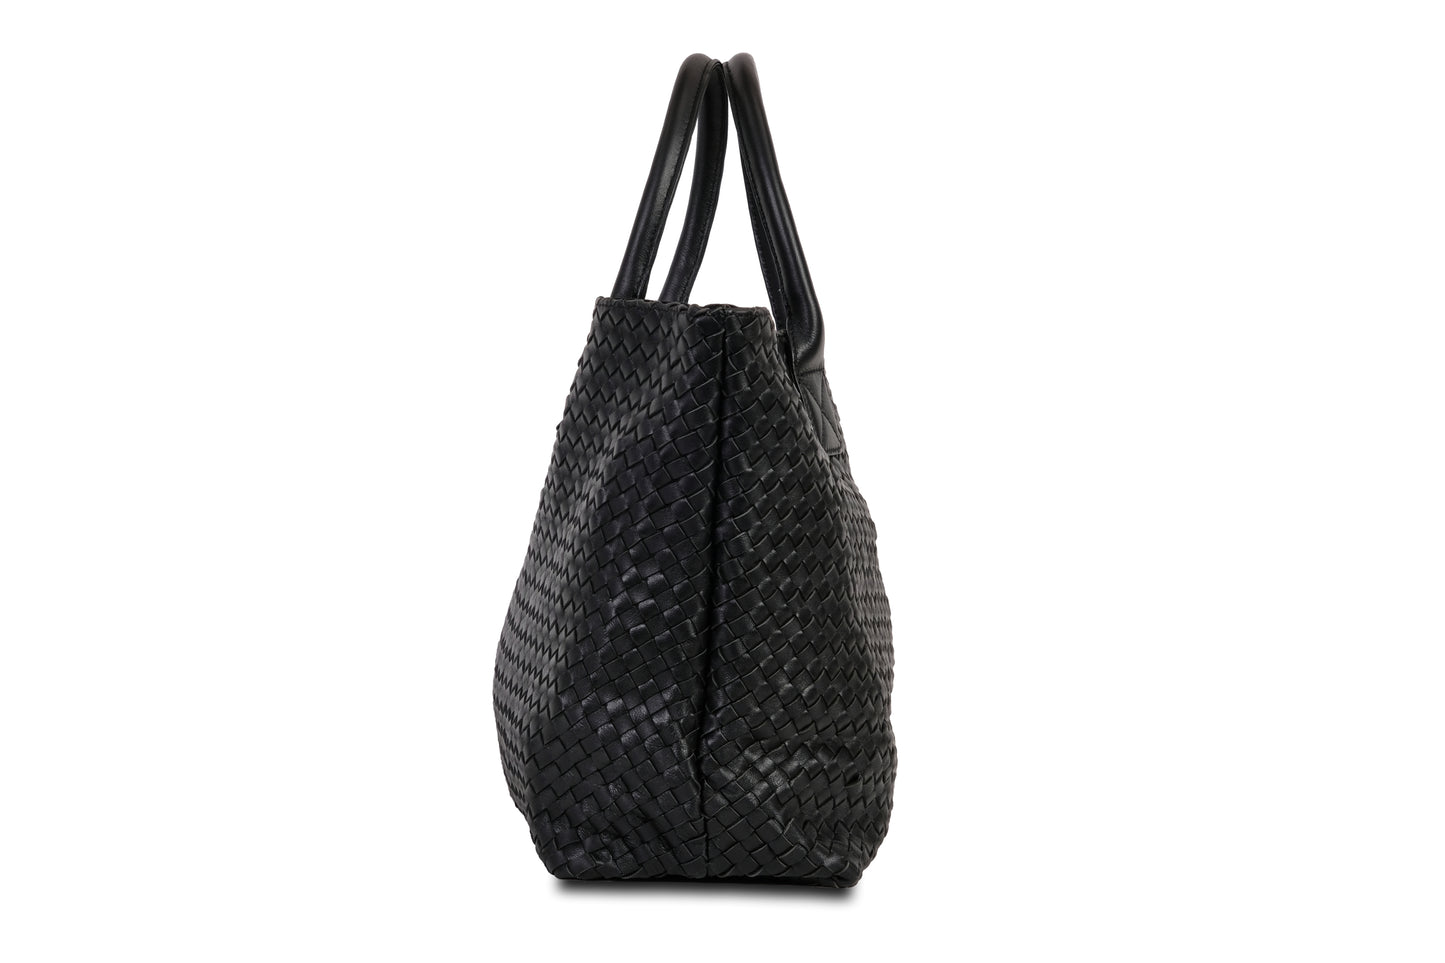 Destarina Midnight Black Crosshatch Leather Tote Bag Handbag made by Dewi Maya side view available at the best boutique in Upstate South Carolina Spartanburg Greenville Dewi Maya Boutique